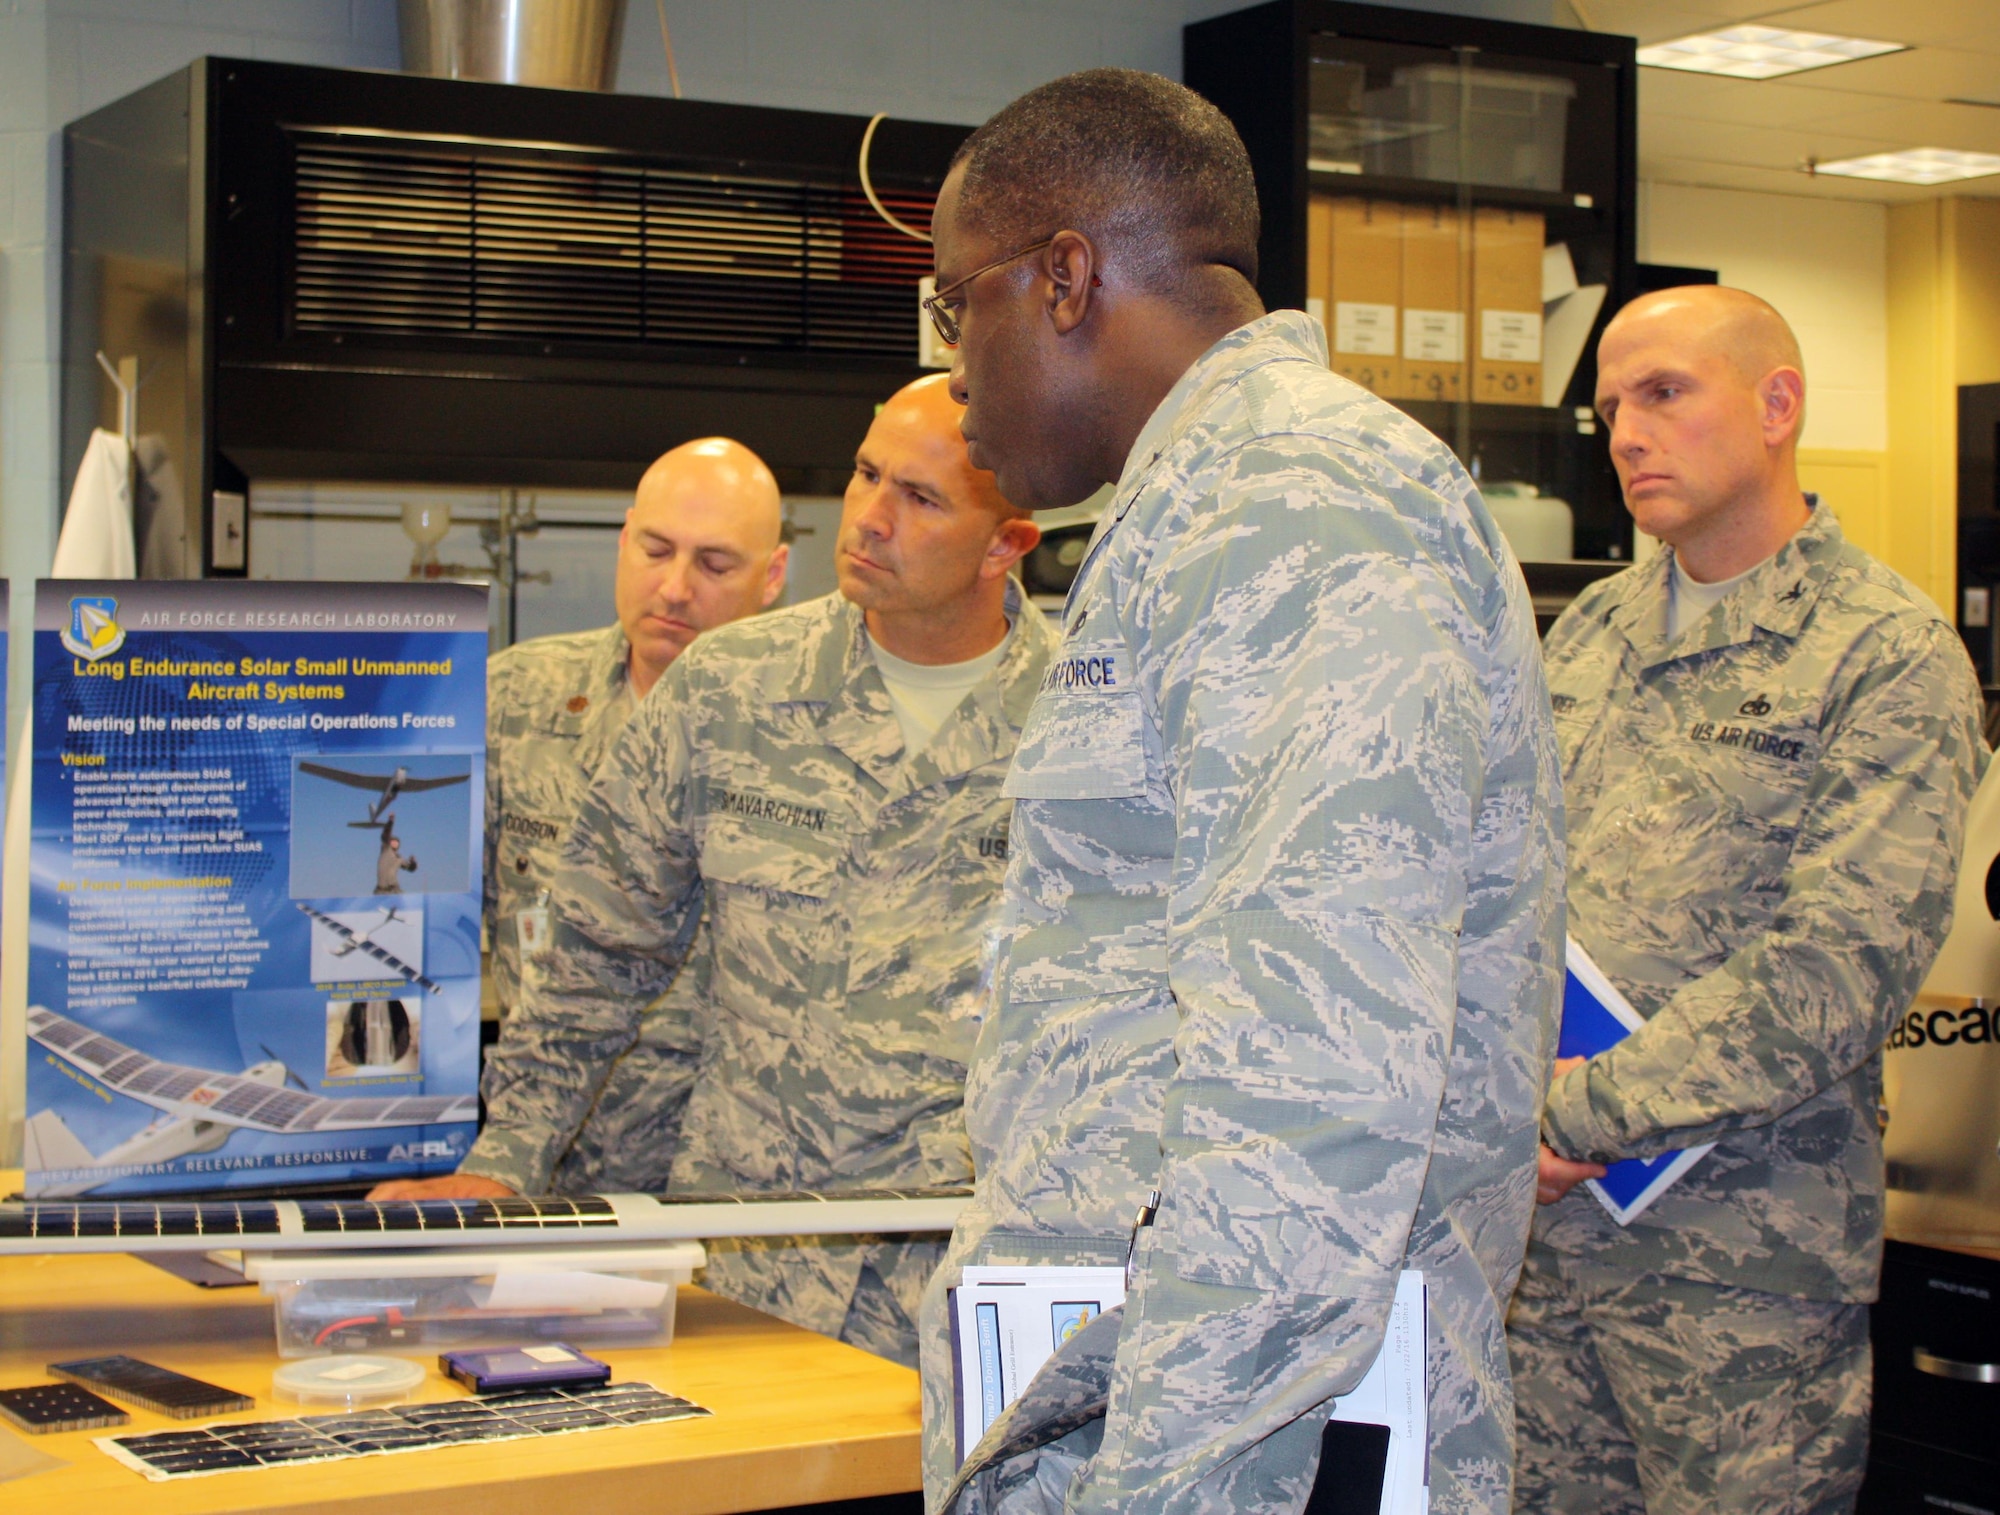 WRIGHT-PATTERSON AIR FORCE BASE, Ohio – Brig. Gen. Stacey T. Hawkins, Director, Logistcs, Engineering and Force Protection, Air Mobility Command (center) learns more about additive manufacturing capabilities for functional materials during a visit to the Materials and Manufacturing Directorate, Air Force Research Laboratory, Aug. 26. The laboratory visit was part of a larger tour of AFRL facilities to gain in-depth knowledge of current capabilities for additive manufacturing technology. The visit included a directorate overview, discussions on additive manufacturing applications and visits to multiple research laboratories, highlighting 3-D printing capabilities for metals, polymer-based materials and functional material applications. AMC is exploring the possibilities of using additive manufacturing for replacement parts for aircraft during the life-cycle maintenance process. (Air Force photo by Marisa Novobilski/released)

